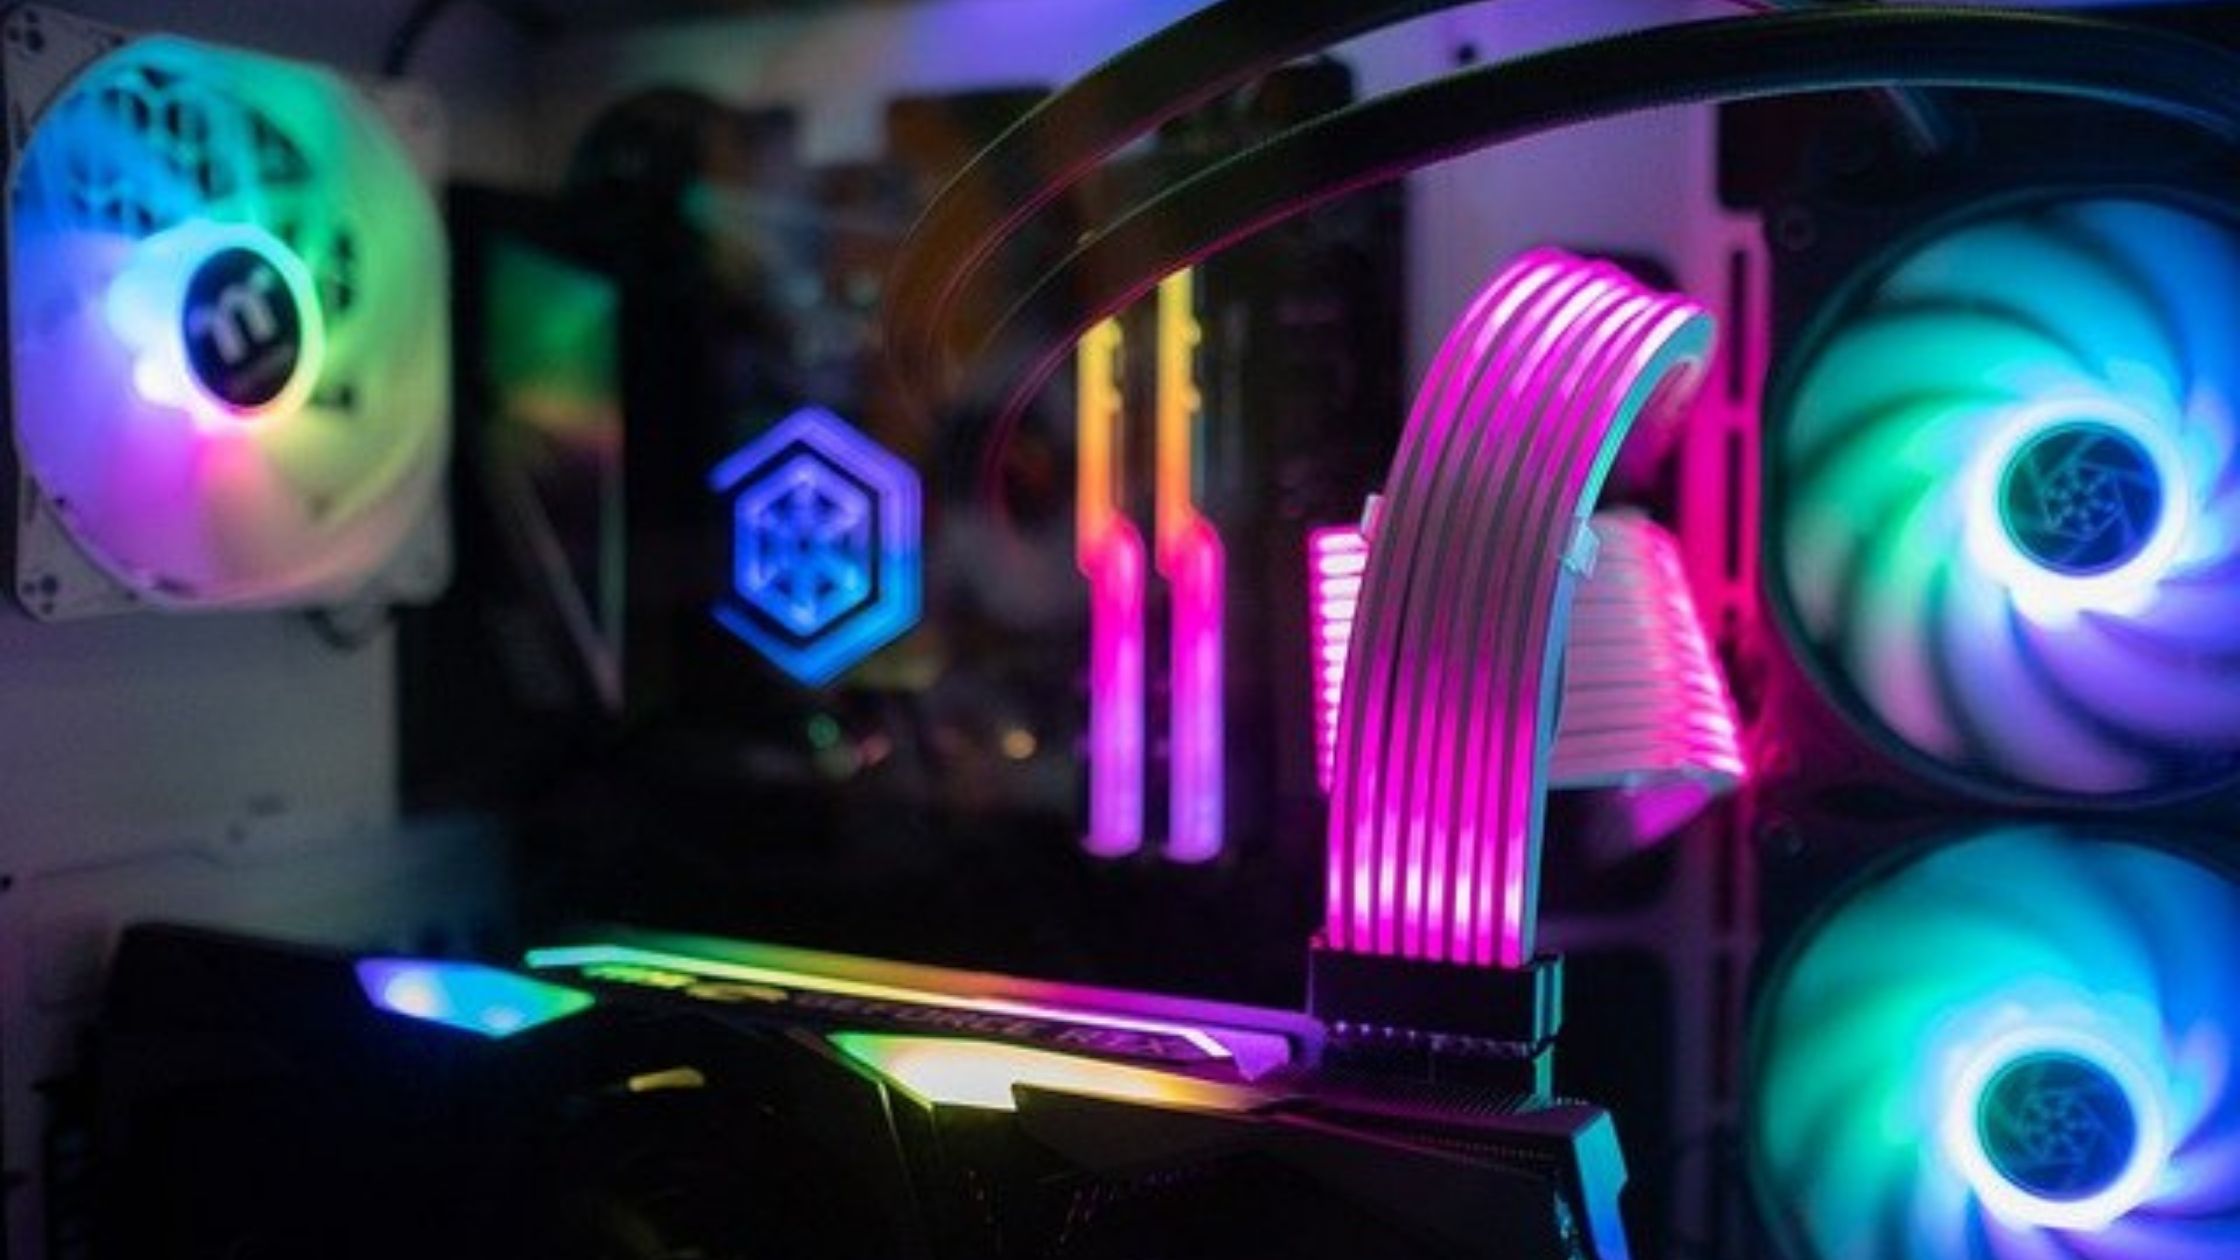 Step-by-Step Guide to Upgrade Your PC for Better Gaming Performance